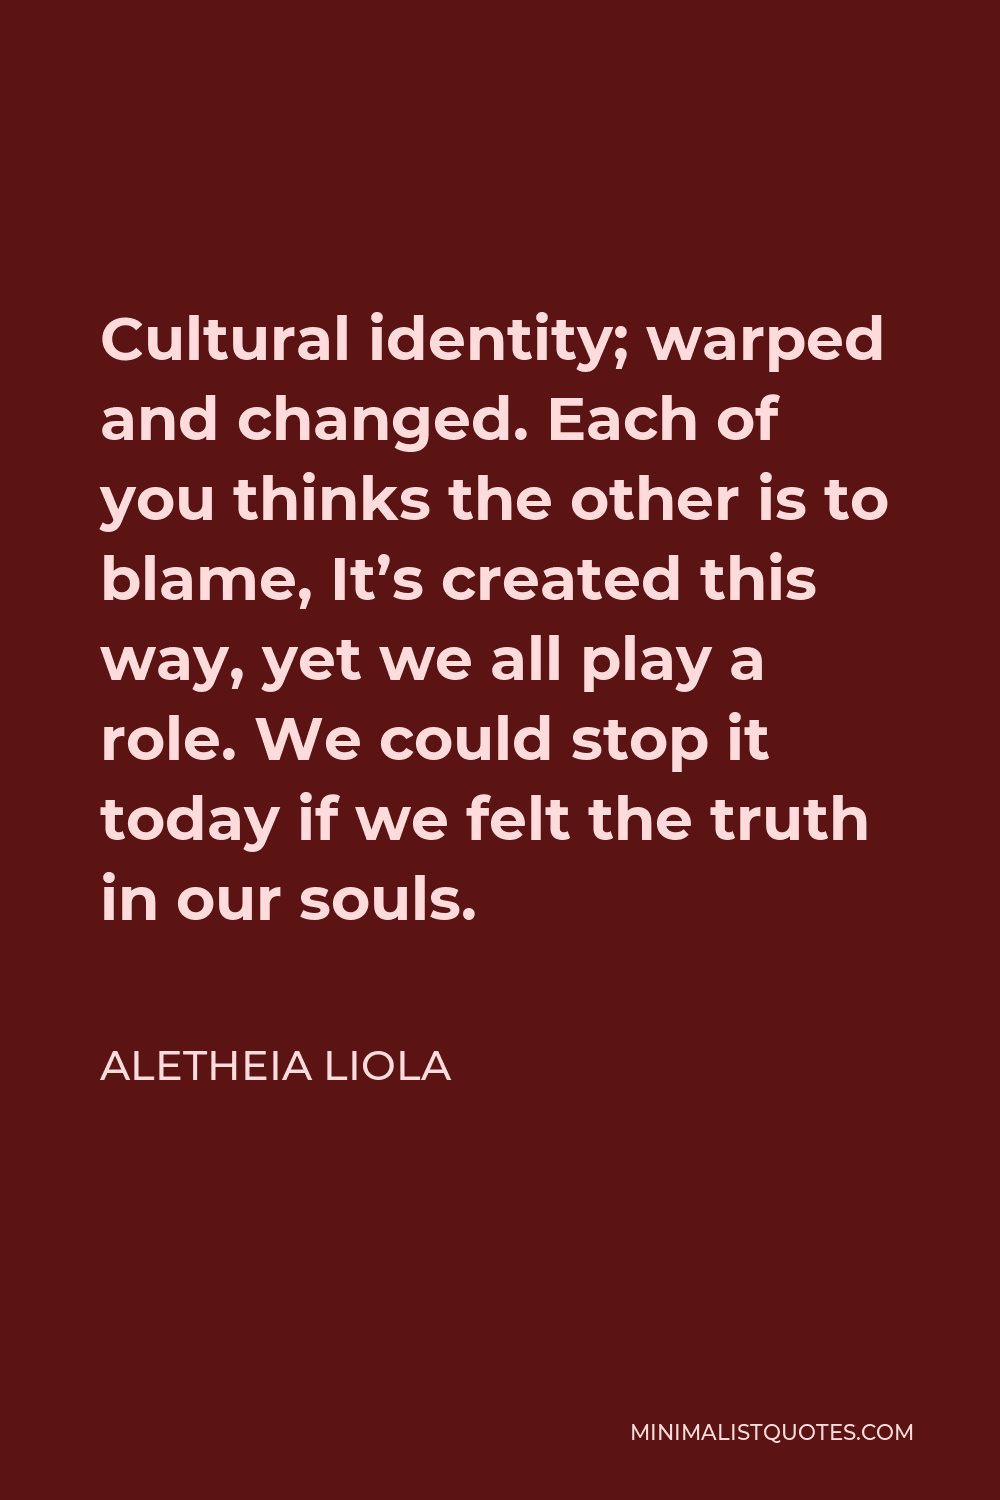 Aletheia Liola Quote - Cultural identity; warped and changed. Each of you thinks the other is to blame, It’s created this way, yet we all play a role. We could stop it today if we felt the truth in our souls.